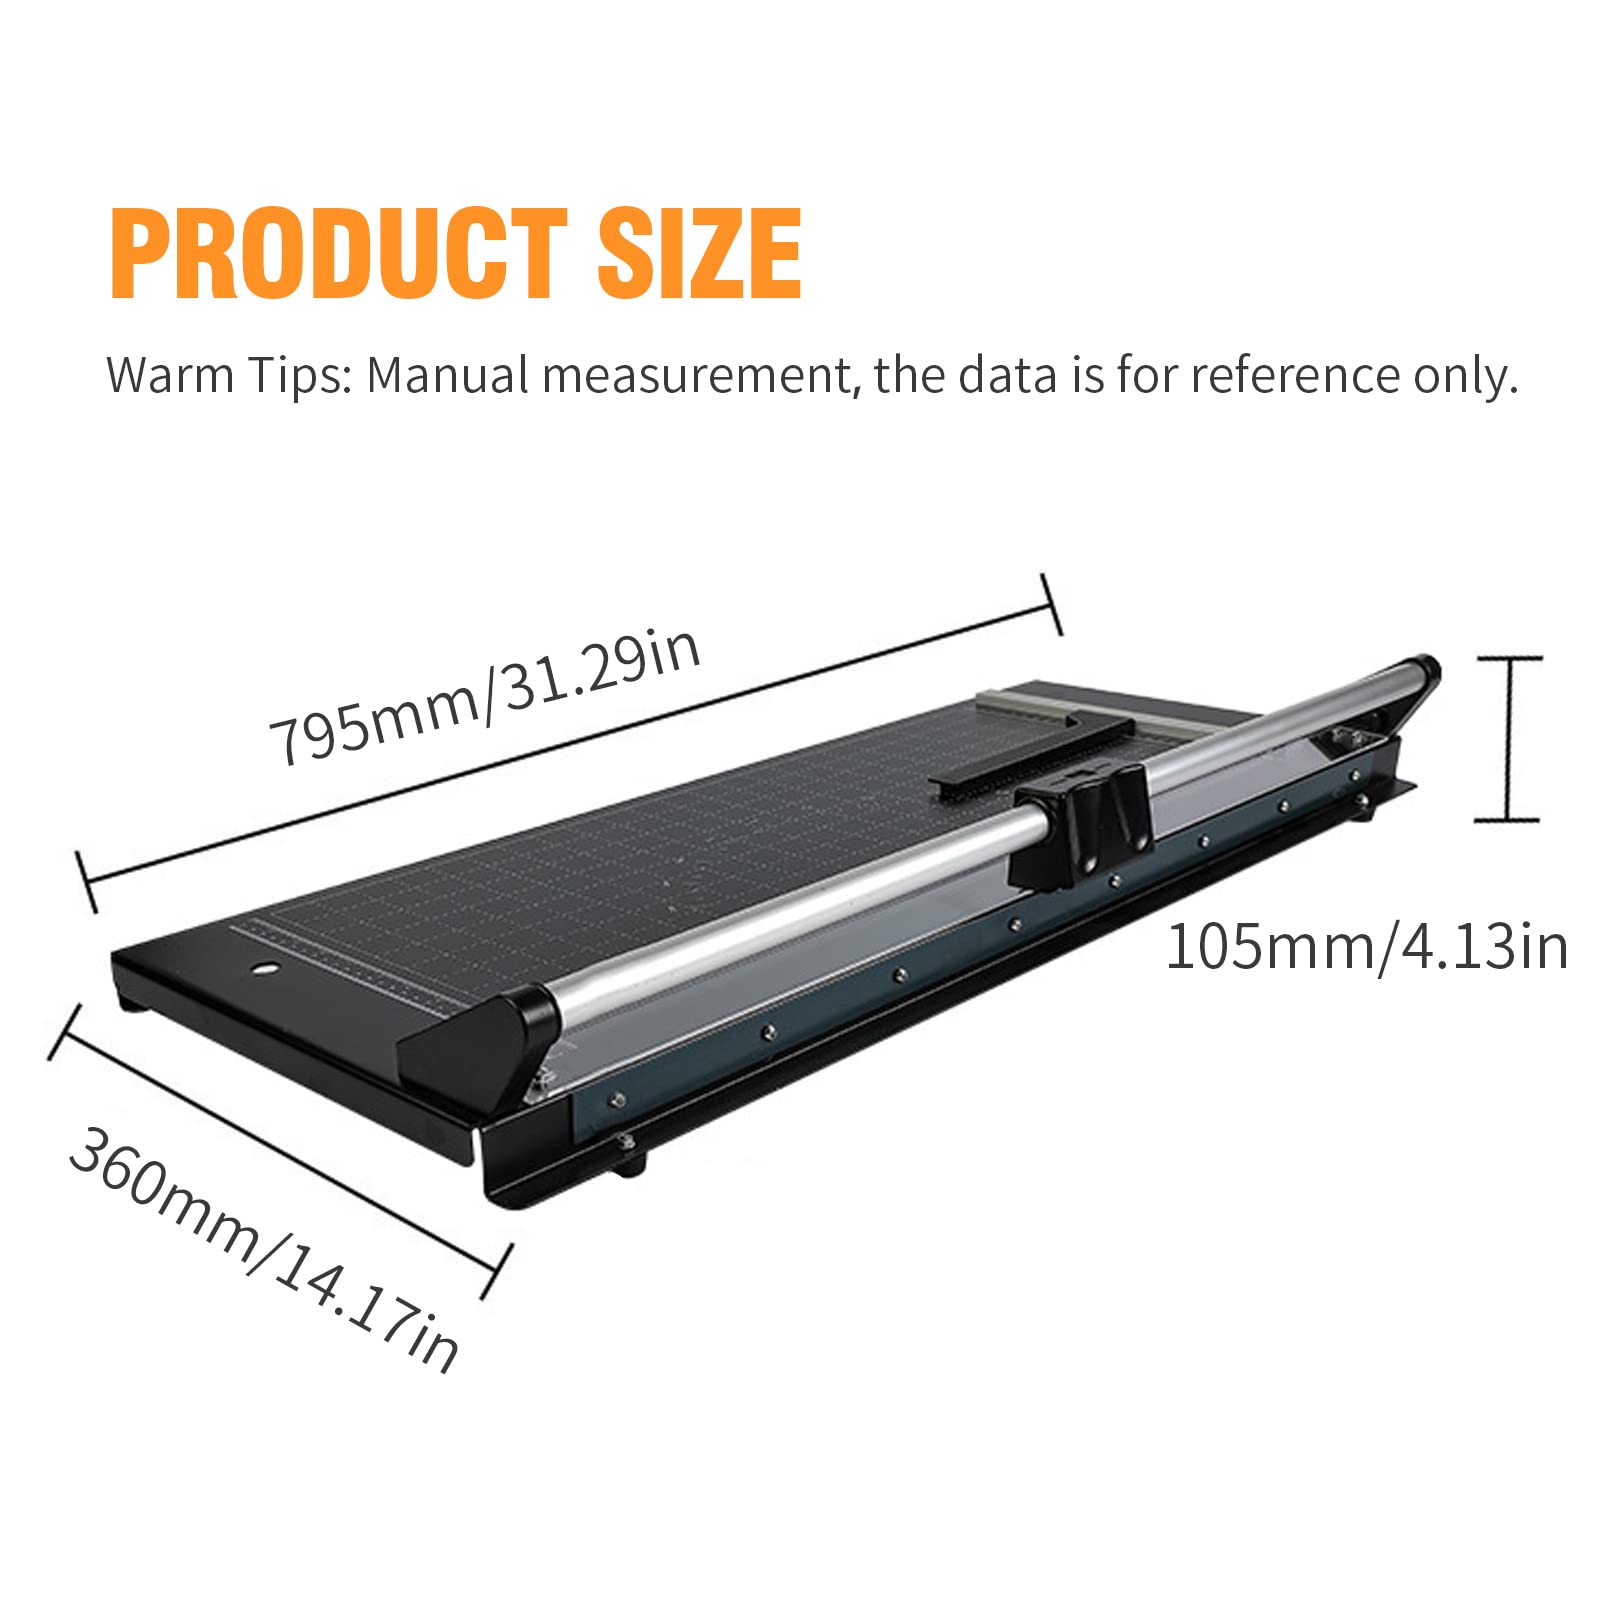 24 Inch Paper Cutter, Manual Precision Rotary Paper Trimmer, Sharp Photo Paper Cutter, Rotary Paper Cutter Trimmer